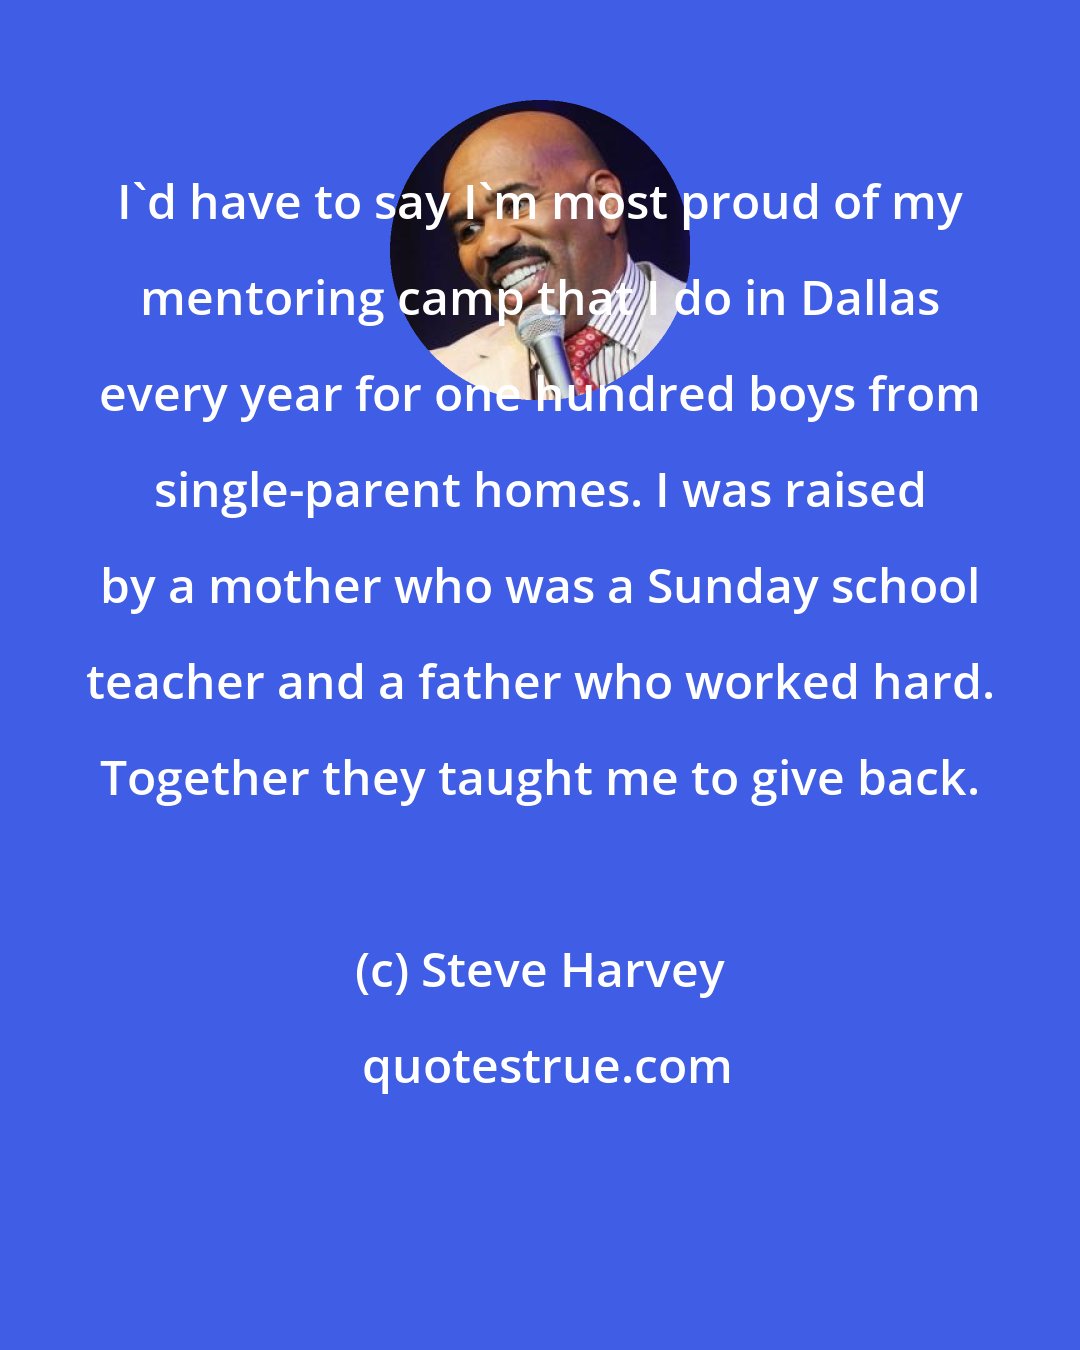 Steve Harvey: I'd have to say I'm most proud of my mentoring camp that I do in Dallas every year for one hundred boys from single-parent homes. I was raised by a mother who was a Sunday school teacher and a father who worked hard. Together they taught me to give back.